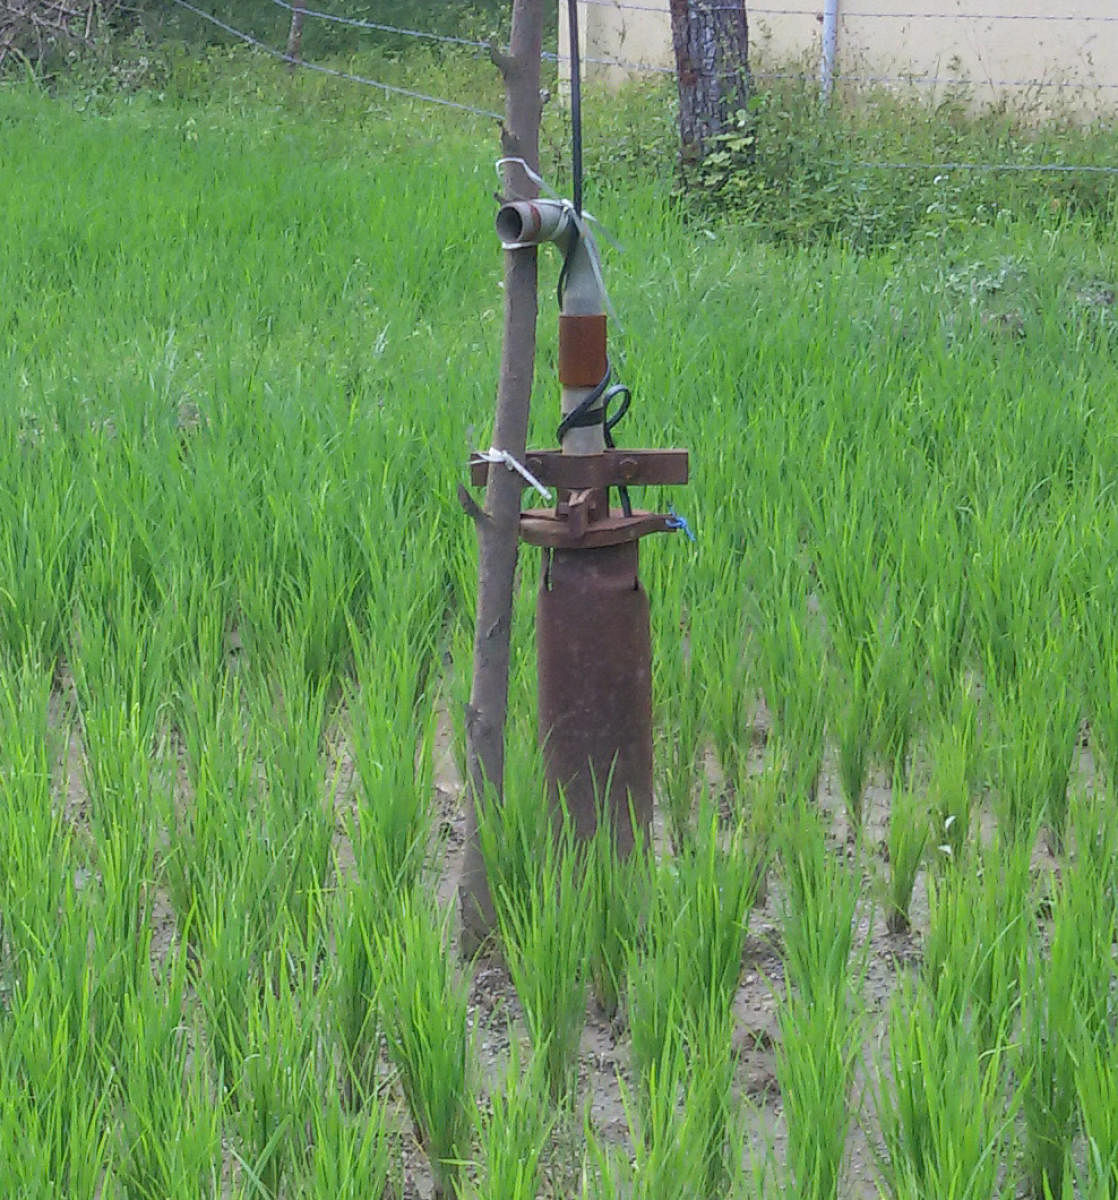 A borewell without power supply, at a paddy field.